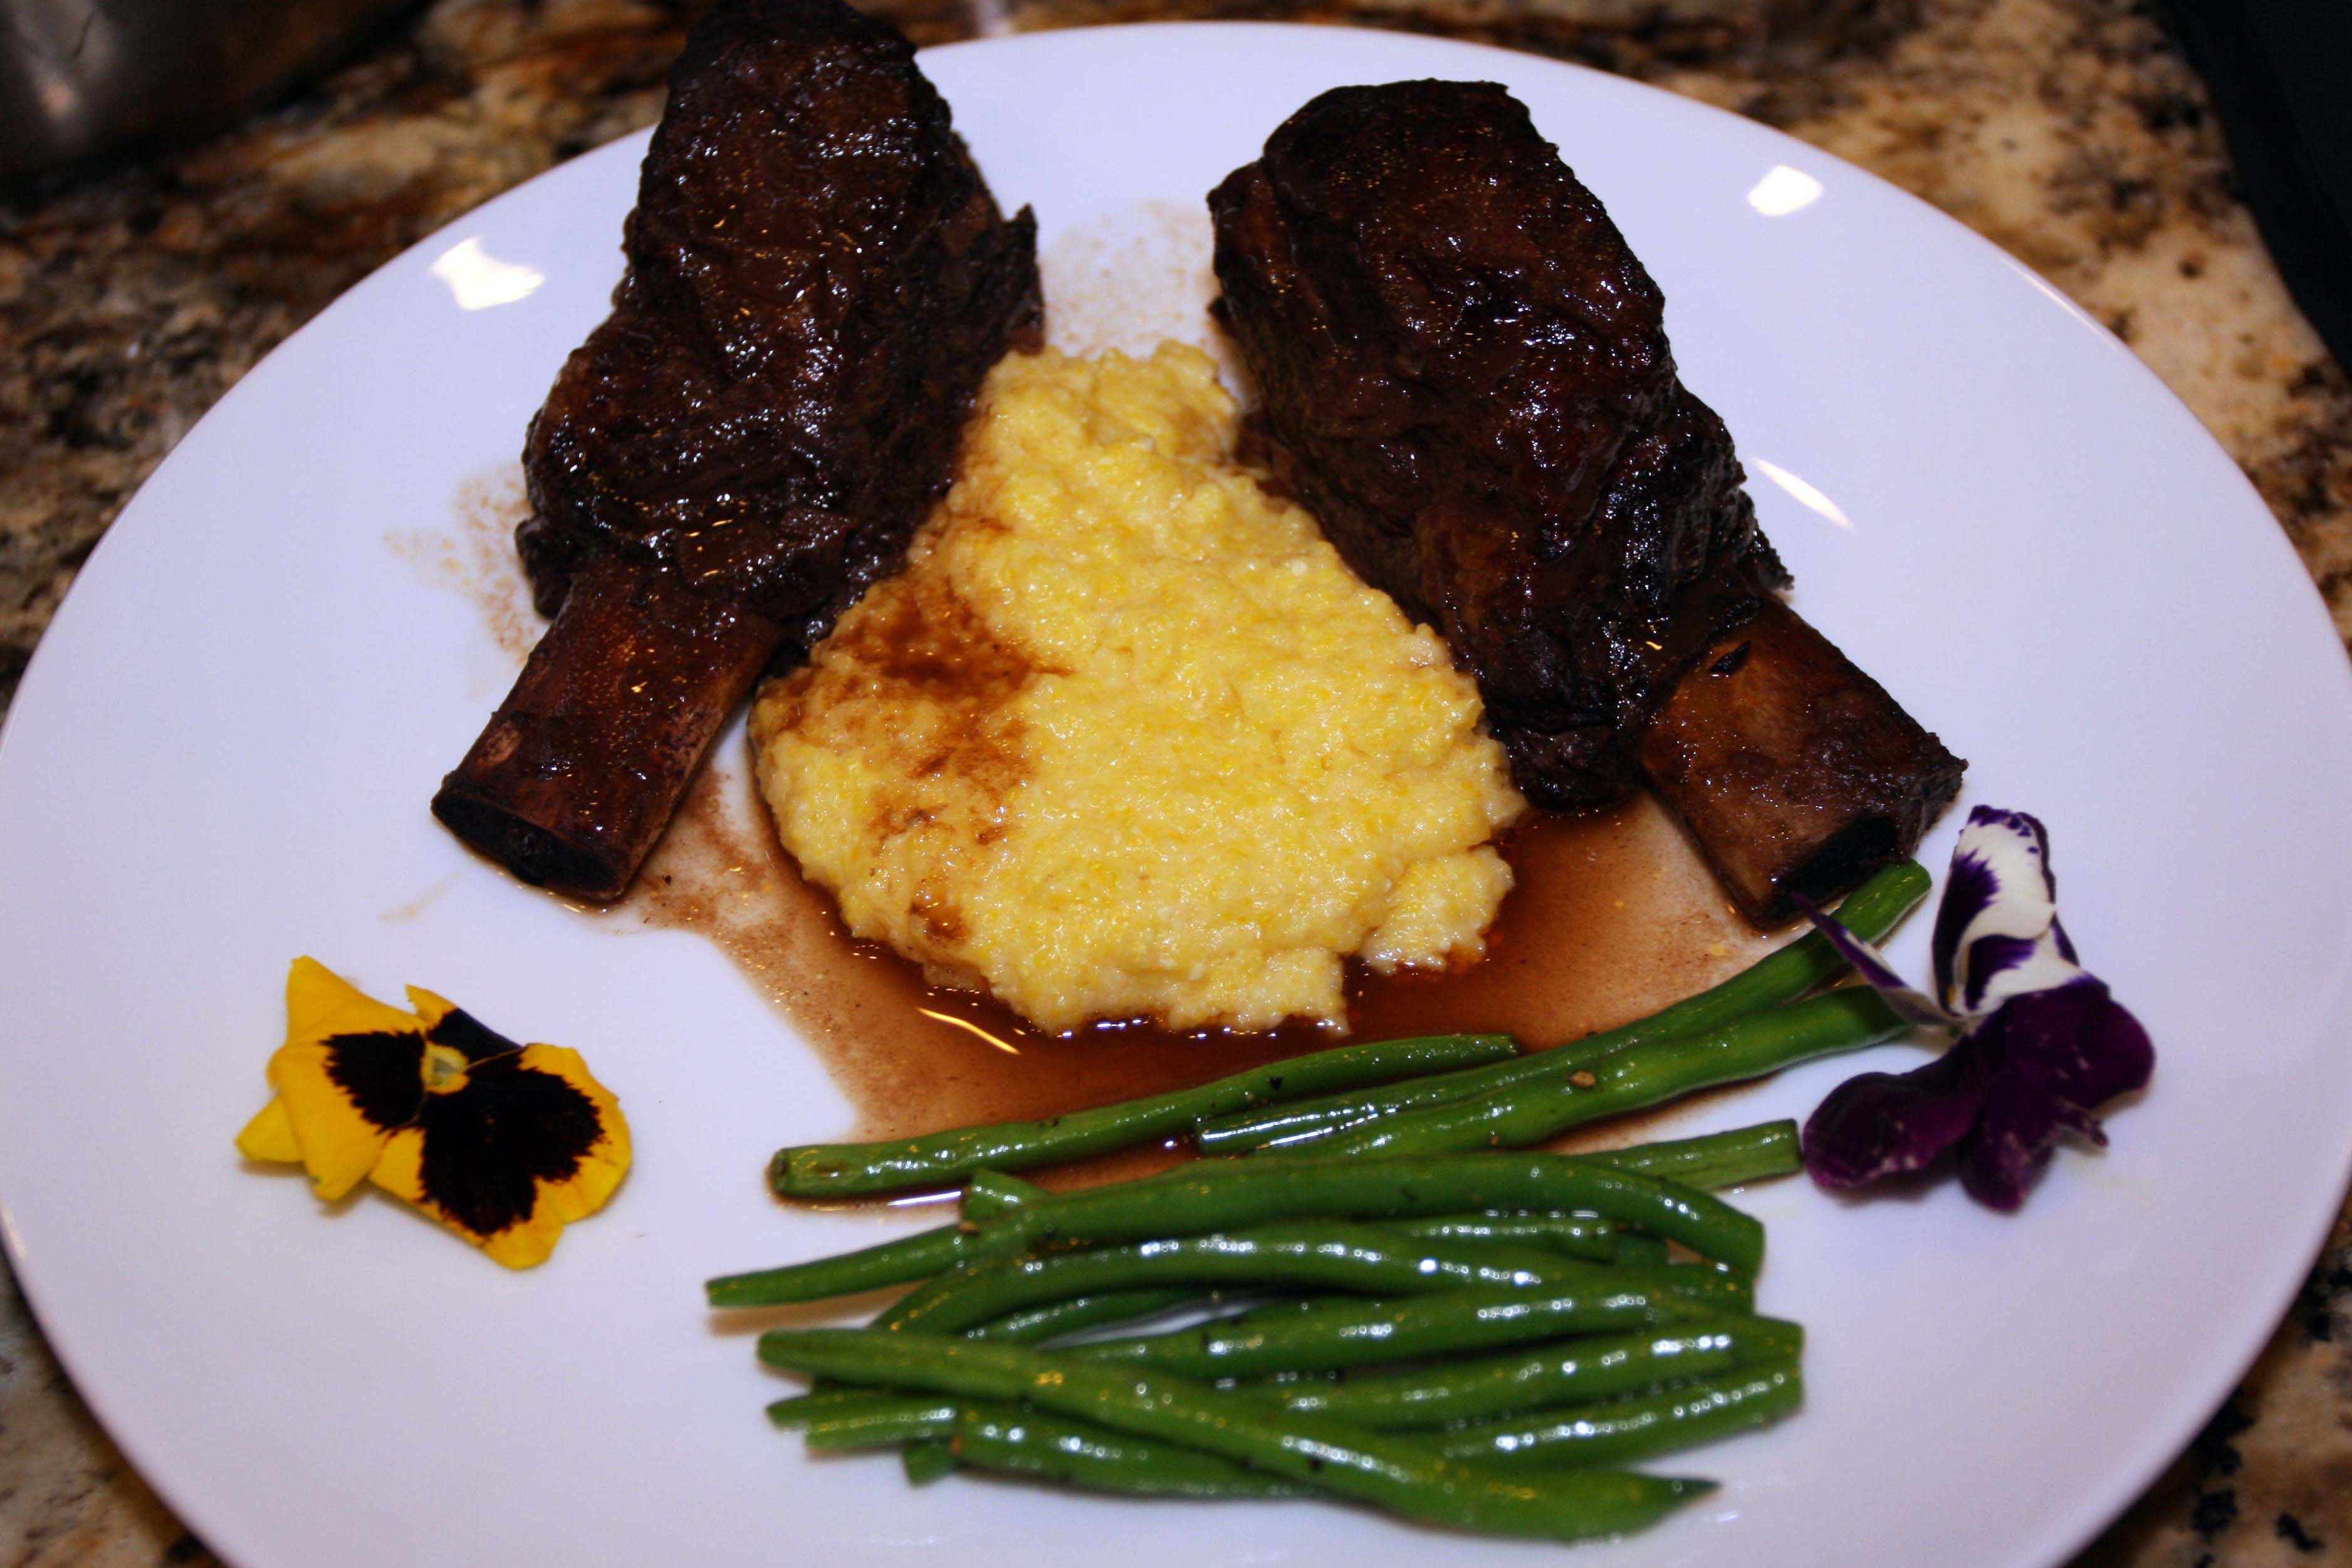 White plate of short ribs, mashed potatoes, and haricot verts garnished with edible flowers.